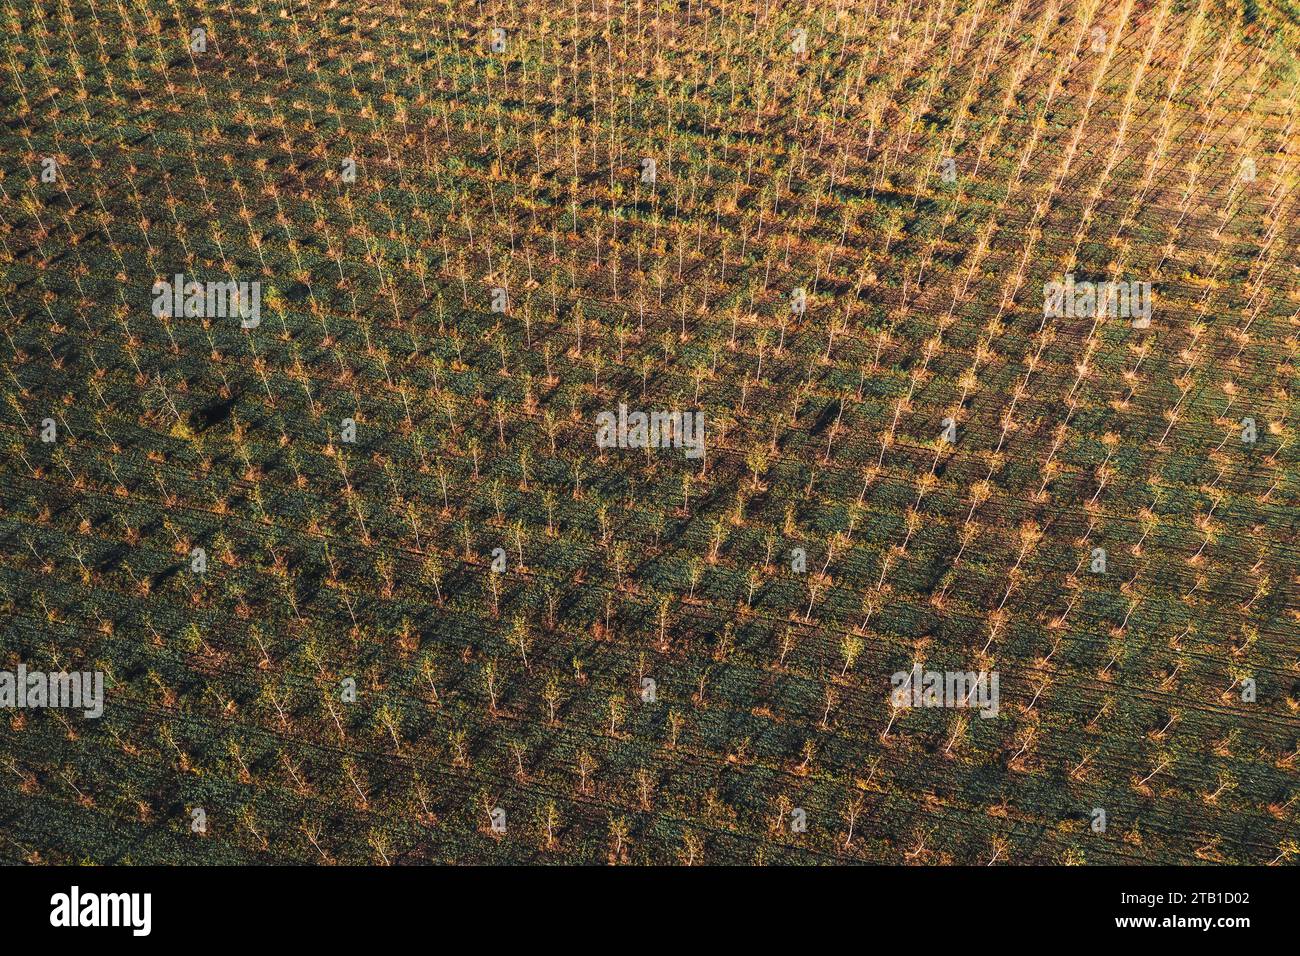 Cottonwood tree nursery plantation from drone pov, aerial shot of young small tress growing, high angle view Stock Photo